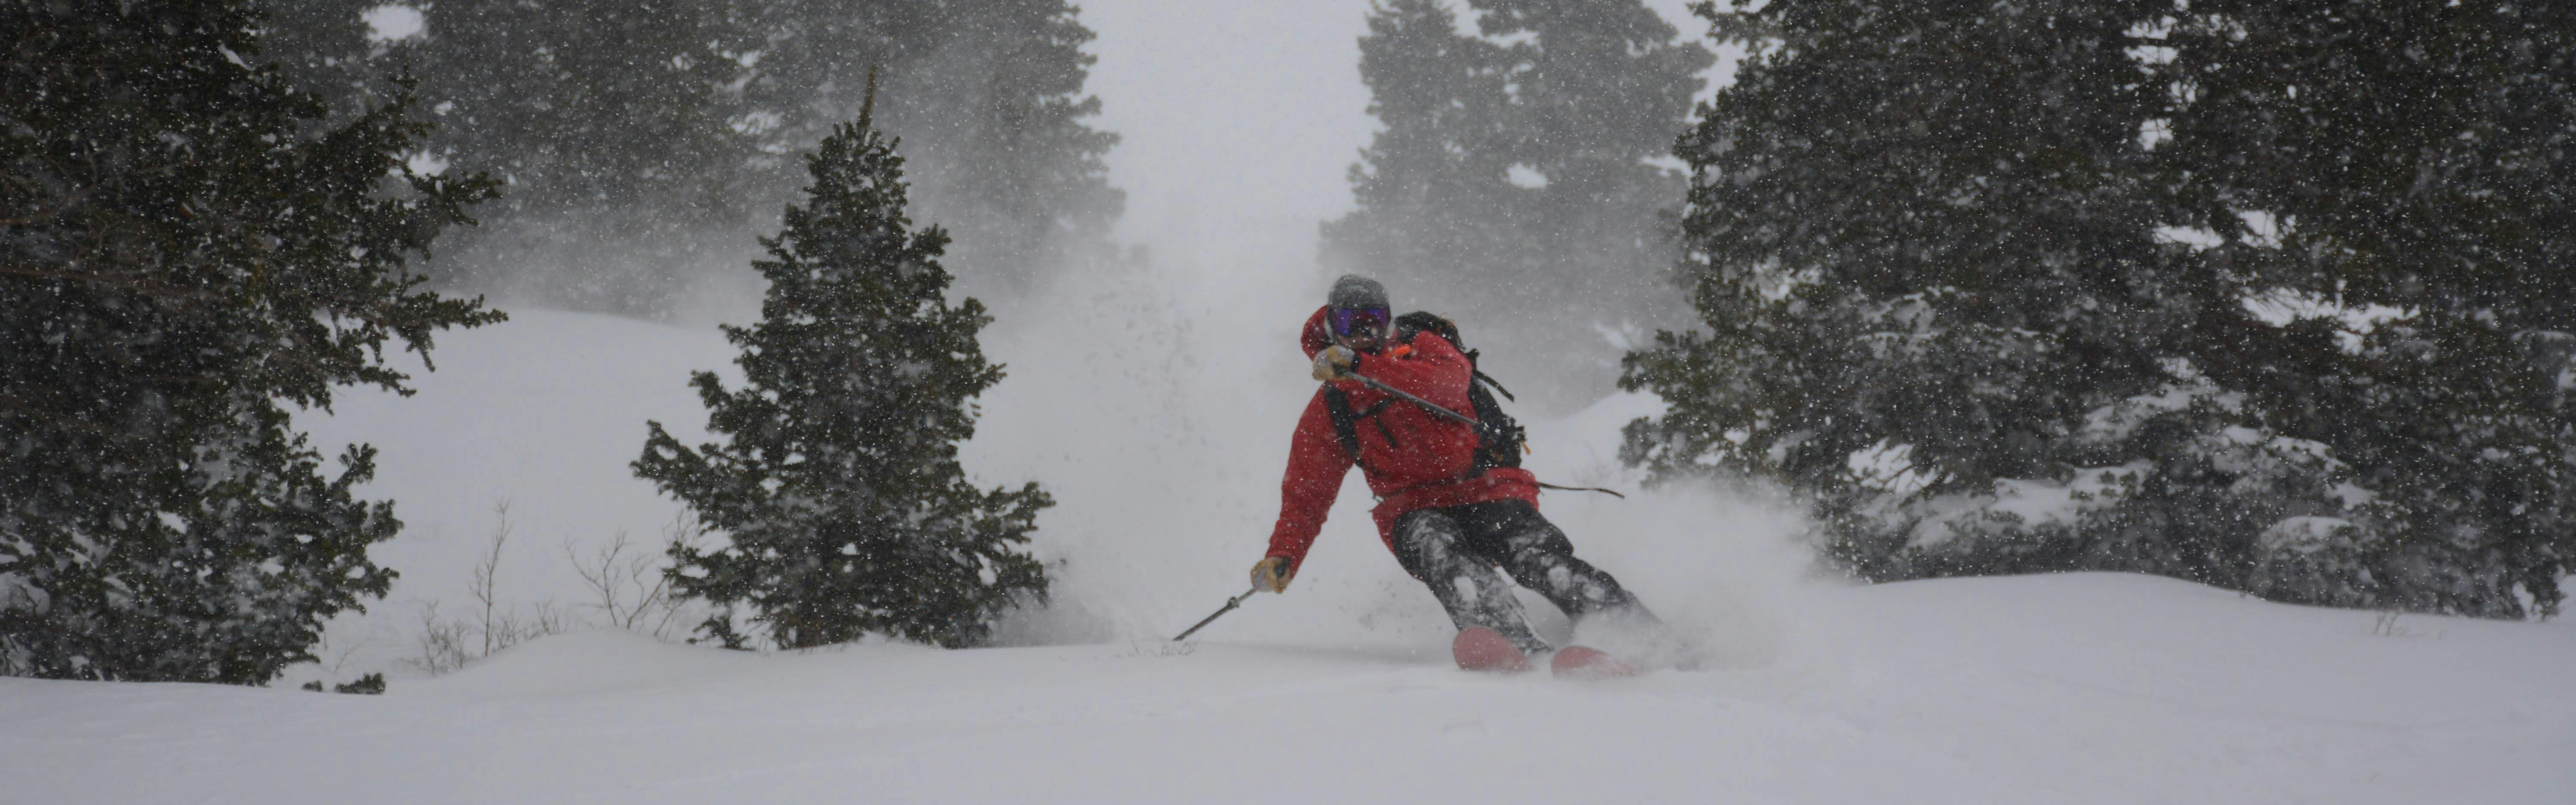 A skier turning down a snowy run with trees on either side. 